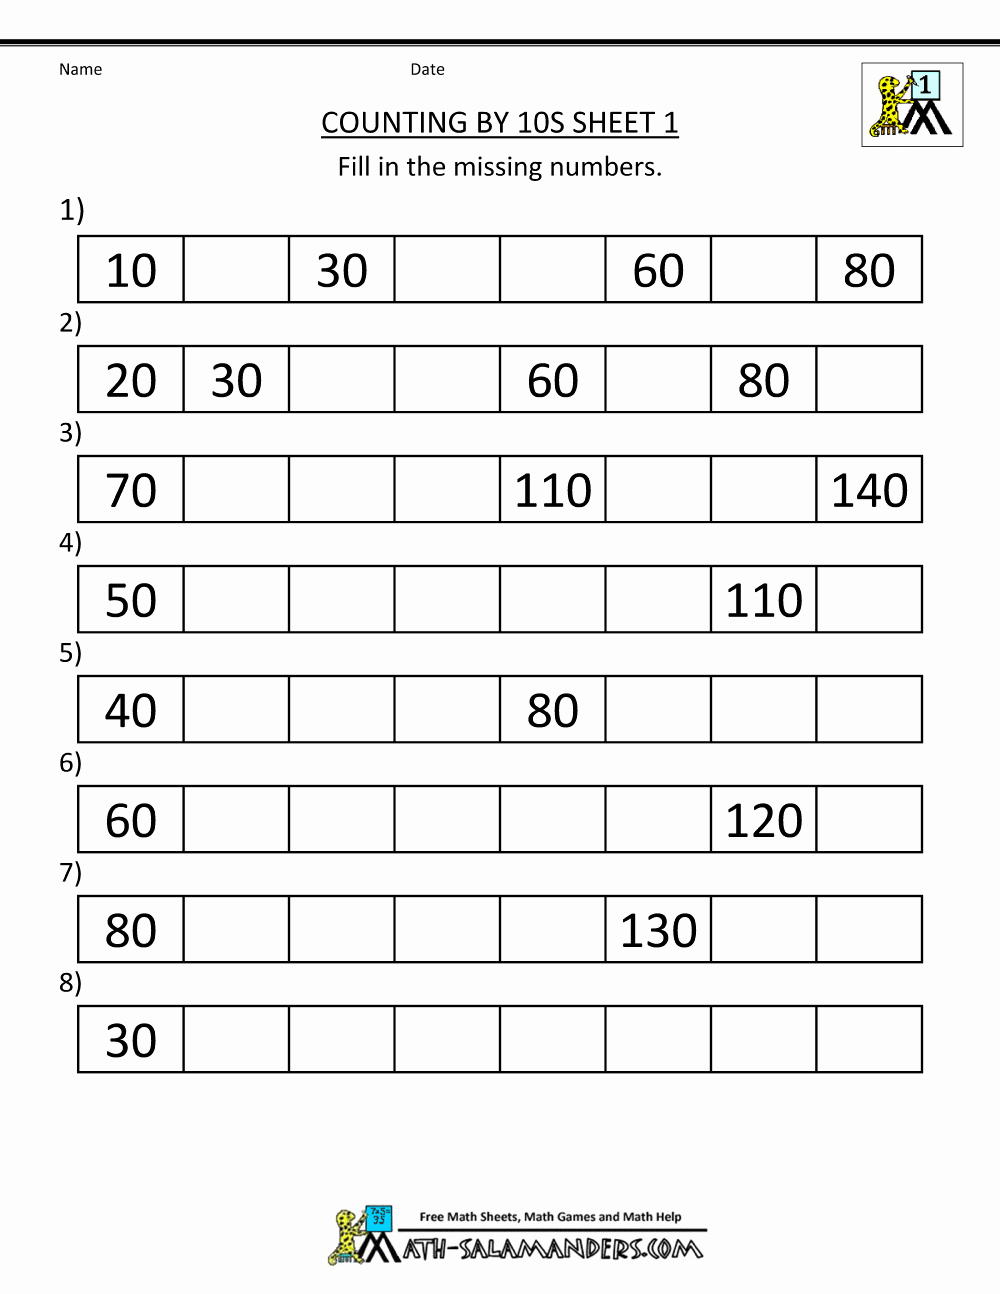 Counting In 10s Worksheet New 1st Grade Math Worksheets Counting by 1s 5s and 10s